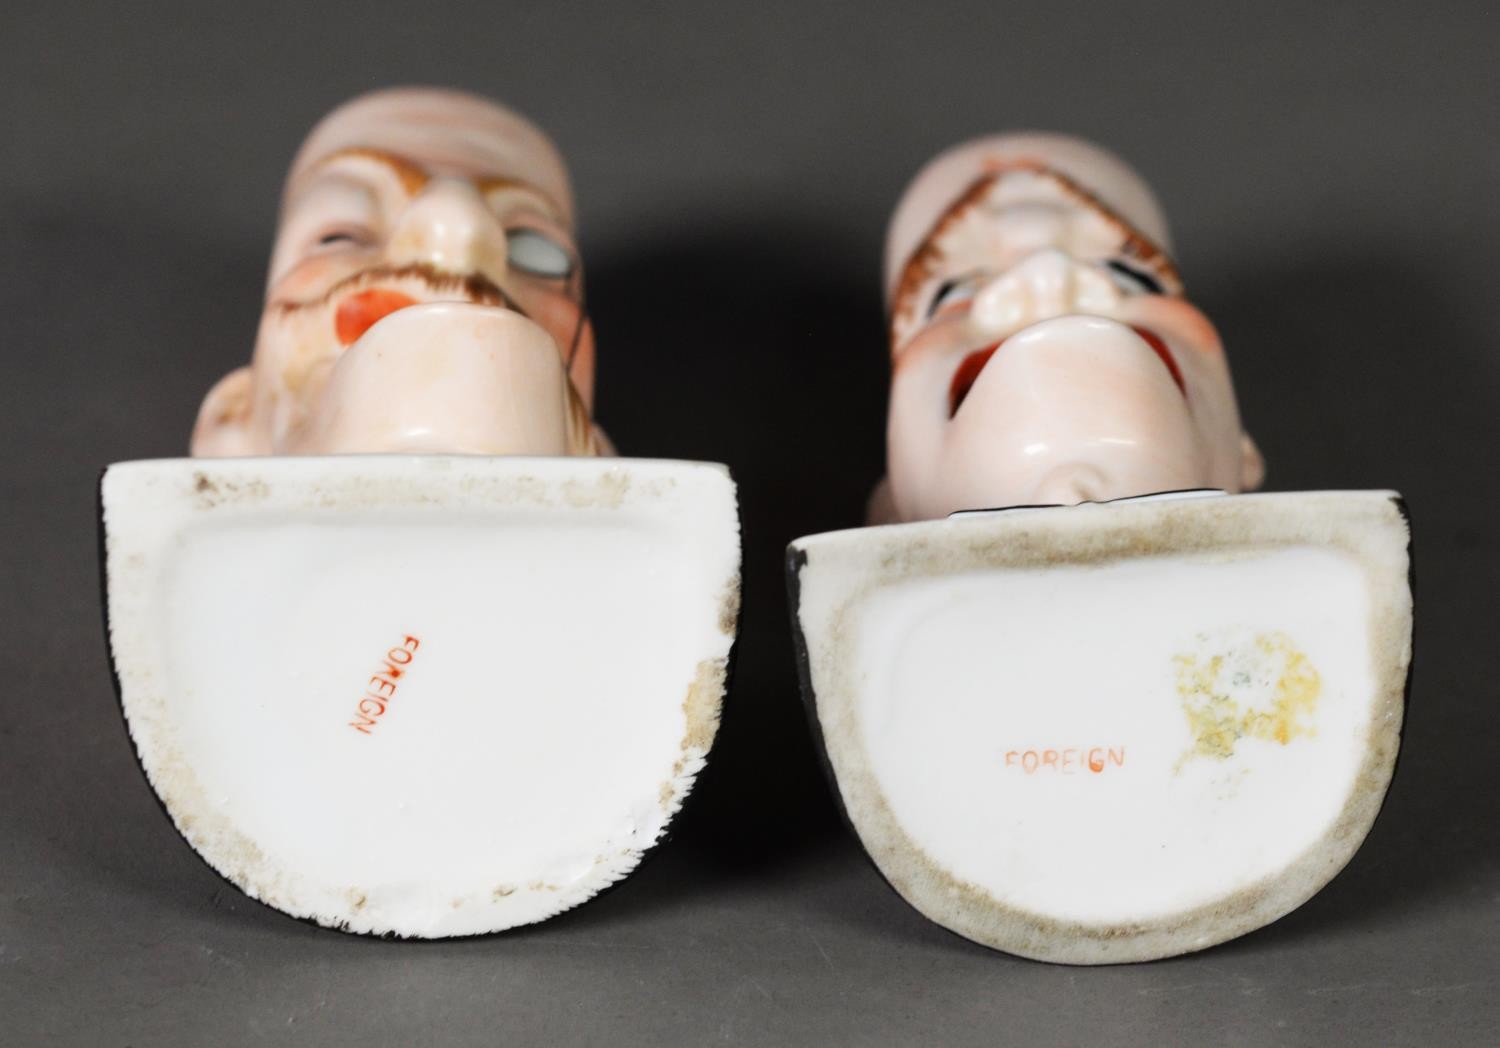 A PAIR OF PORCELAIN SMOKING HEAD ASHTRAYS, by Schafer & Vater; 'For he's a jolly good fellow' and ' - Image 2 of 2